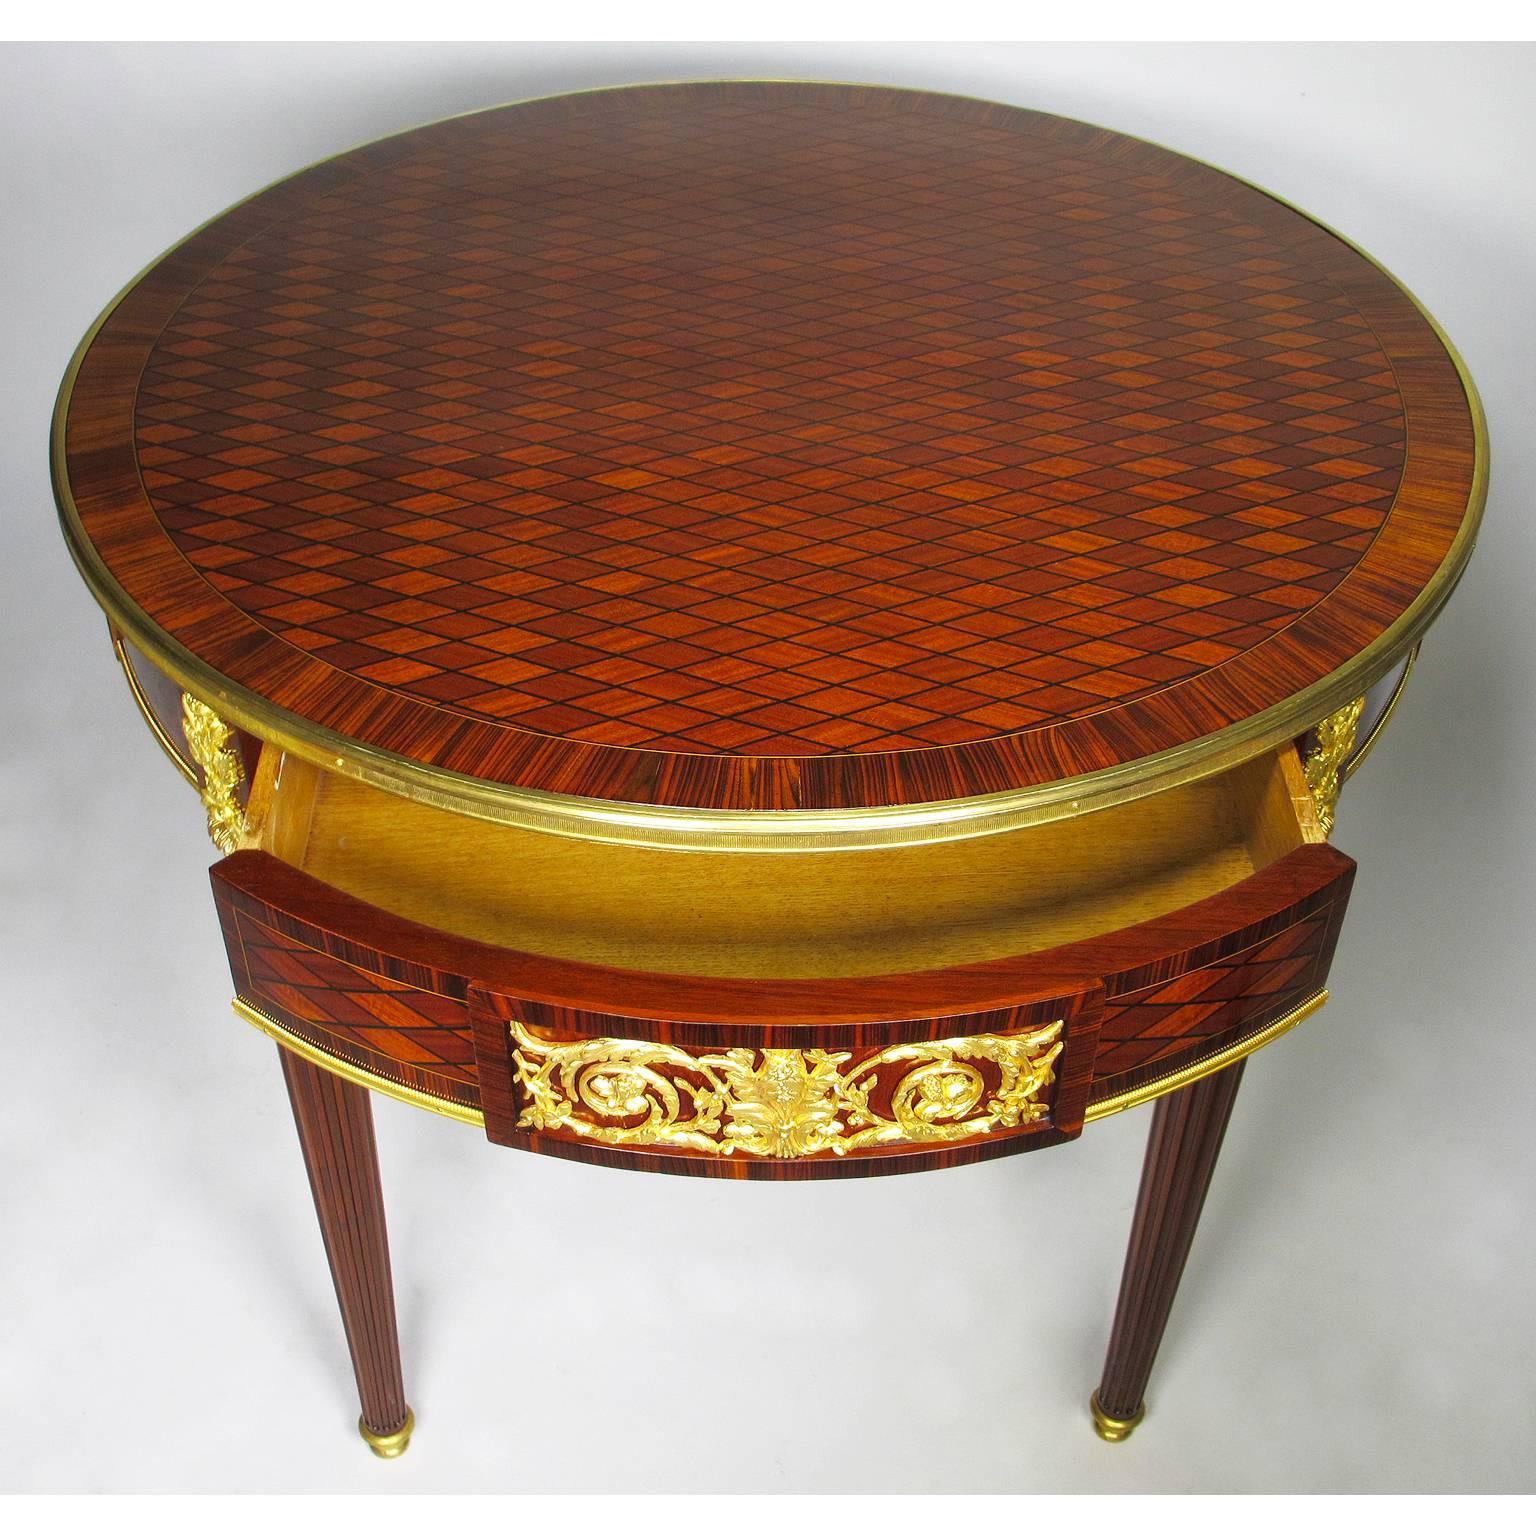 A French 19th-20th Century Louis XVI Style Ormolu-Mounted Guéridon Side Table In Good Condition For Sale In Los Angeles, CA